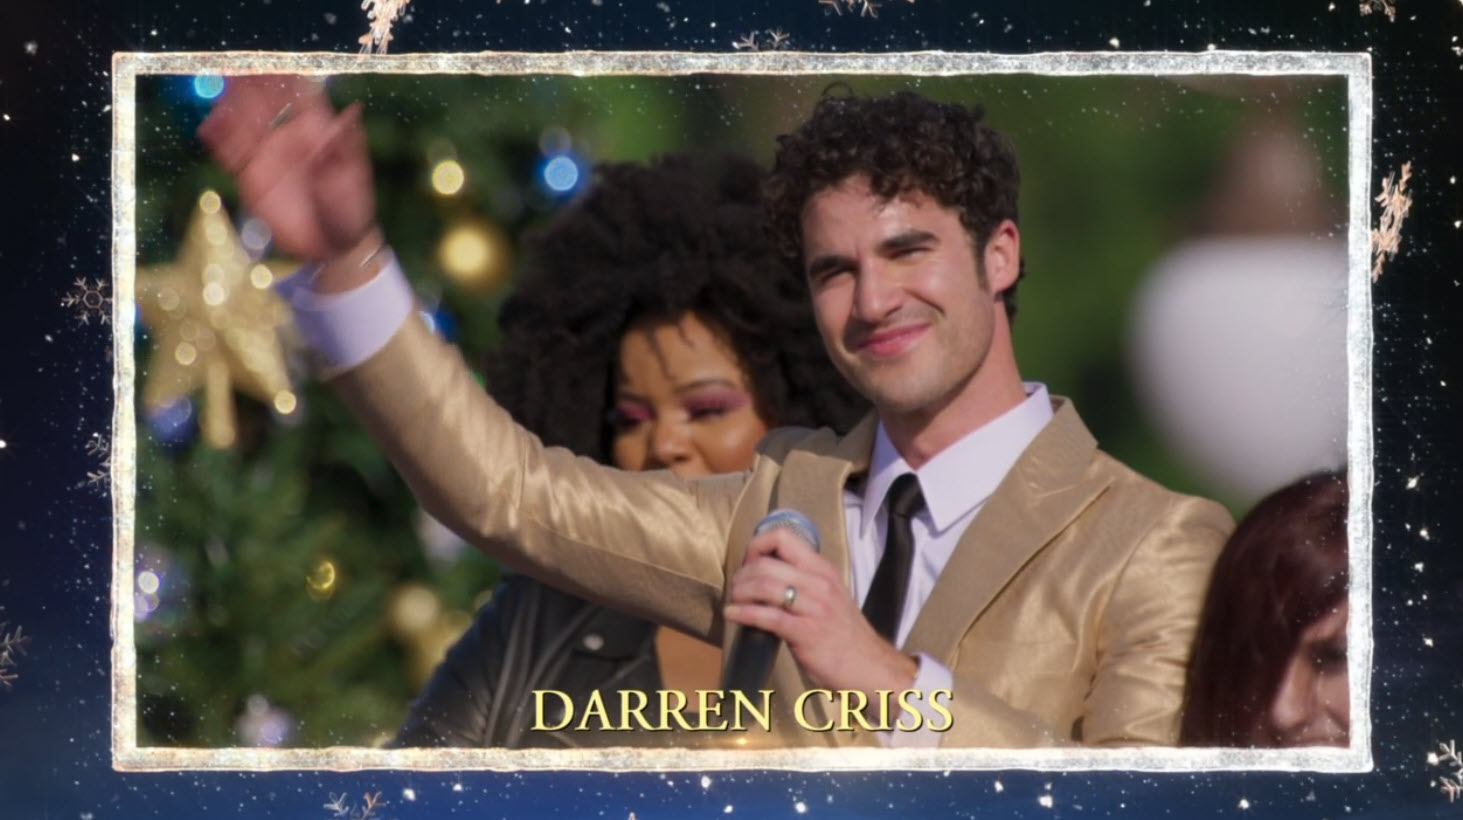 2021 Disney Parks Magical Christmas Day Parade Chance the Rapper – “Who’s to Say” Brett Eldredge – “Rudolph the Red-Nosed Reindeer” Kristin Chenoweth – “Have Yourself a Merry Little Christmas” Darren Criss – “Christmas Dance”